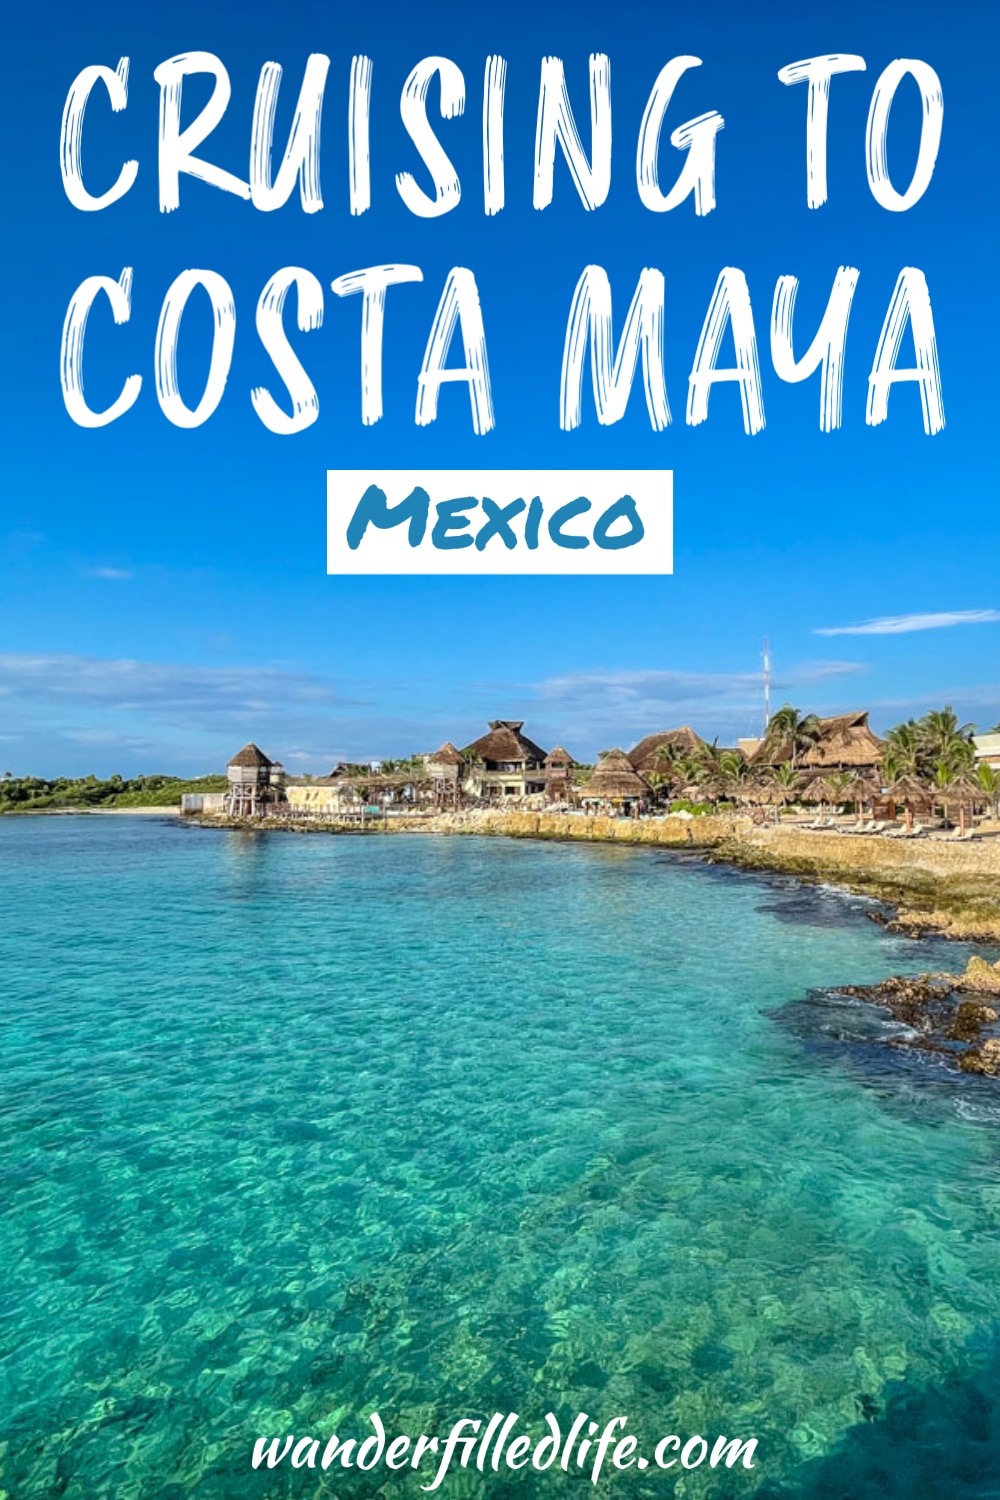 Our tips for visiting the Costa Maya, Mexico cruise port and how to enjoy a half-day excursion to the Chacchoben Mayan ruins.